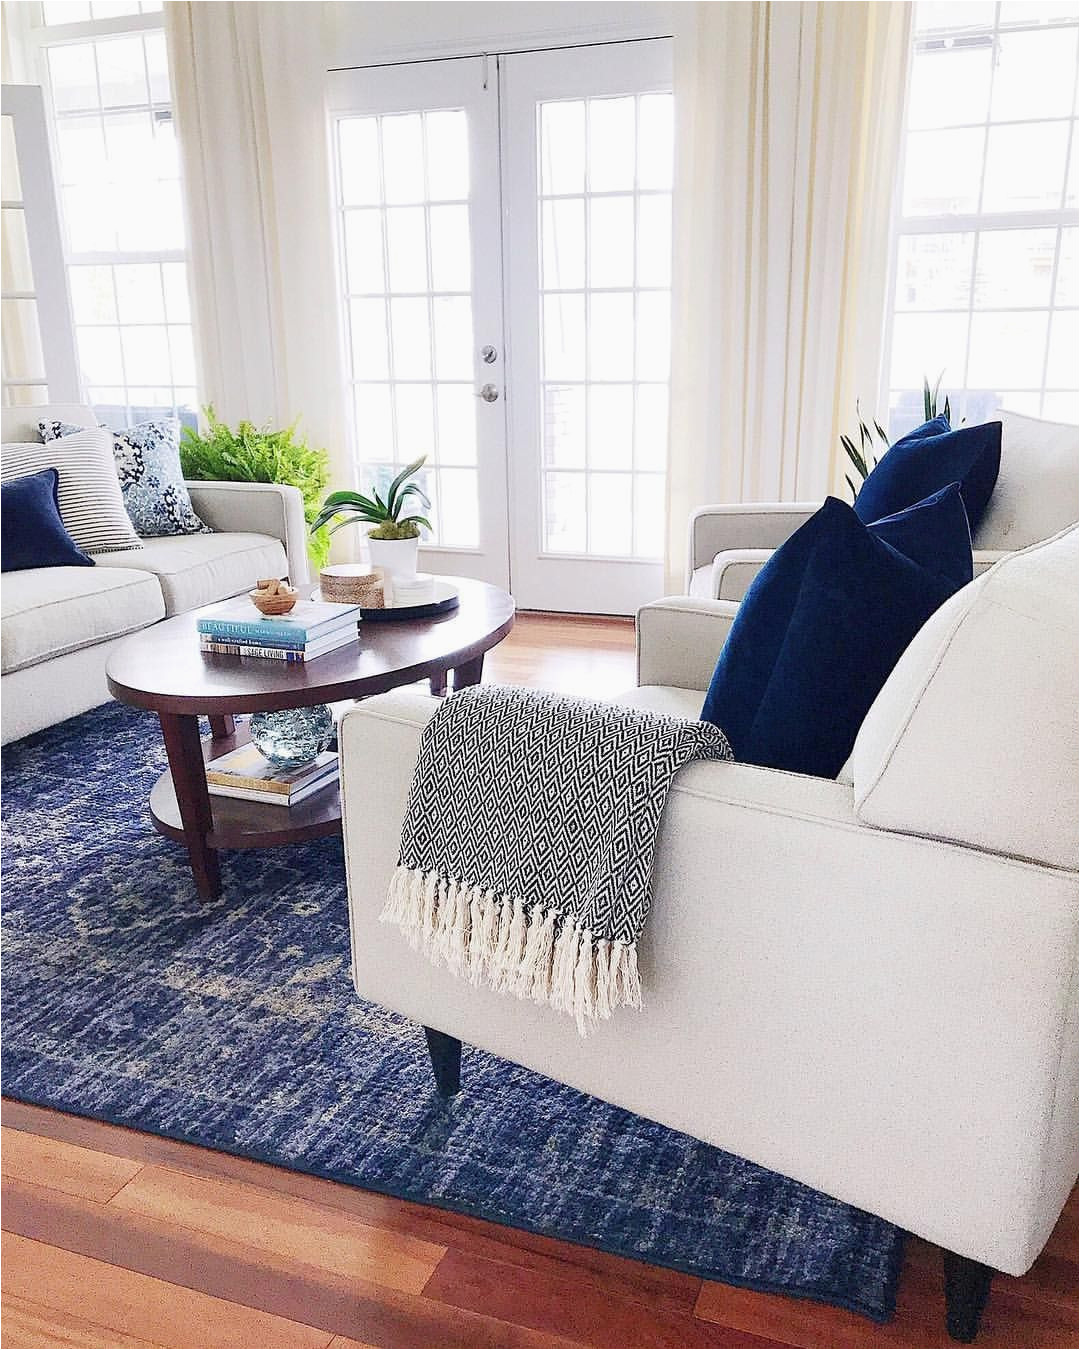 Rug with Blue Accents Living Room with Blue Accents Velvet Pillows and Vintage